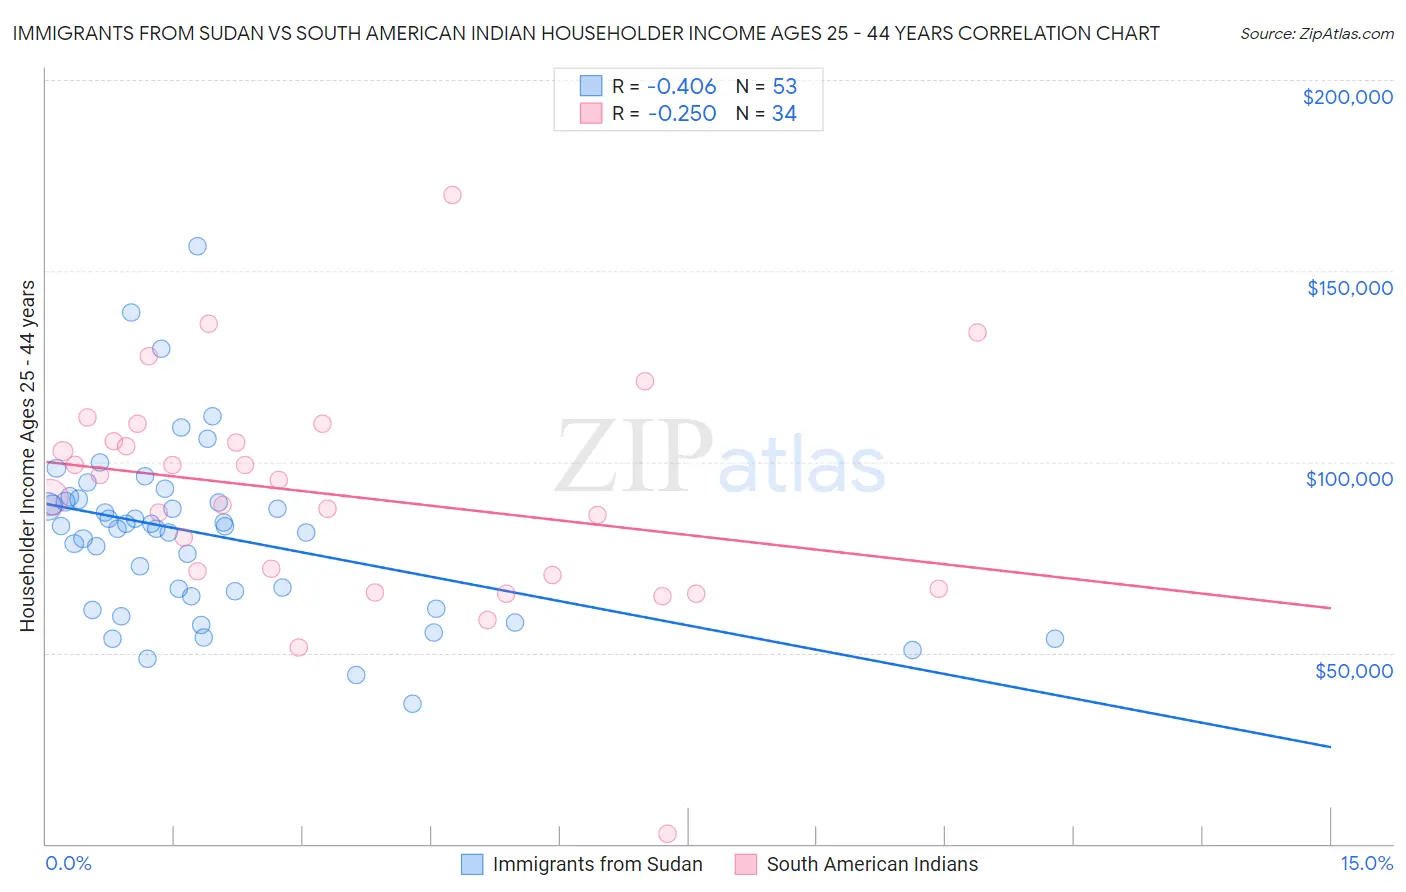 Immigrants from Sudan vs South American Indian Householder Income Ages 25 - 44 years